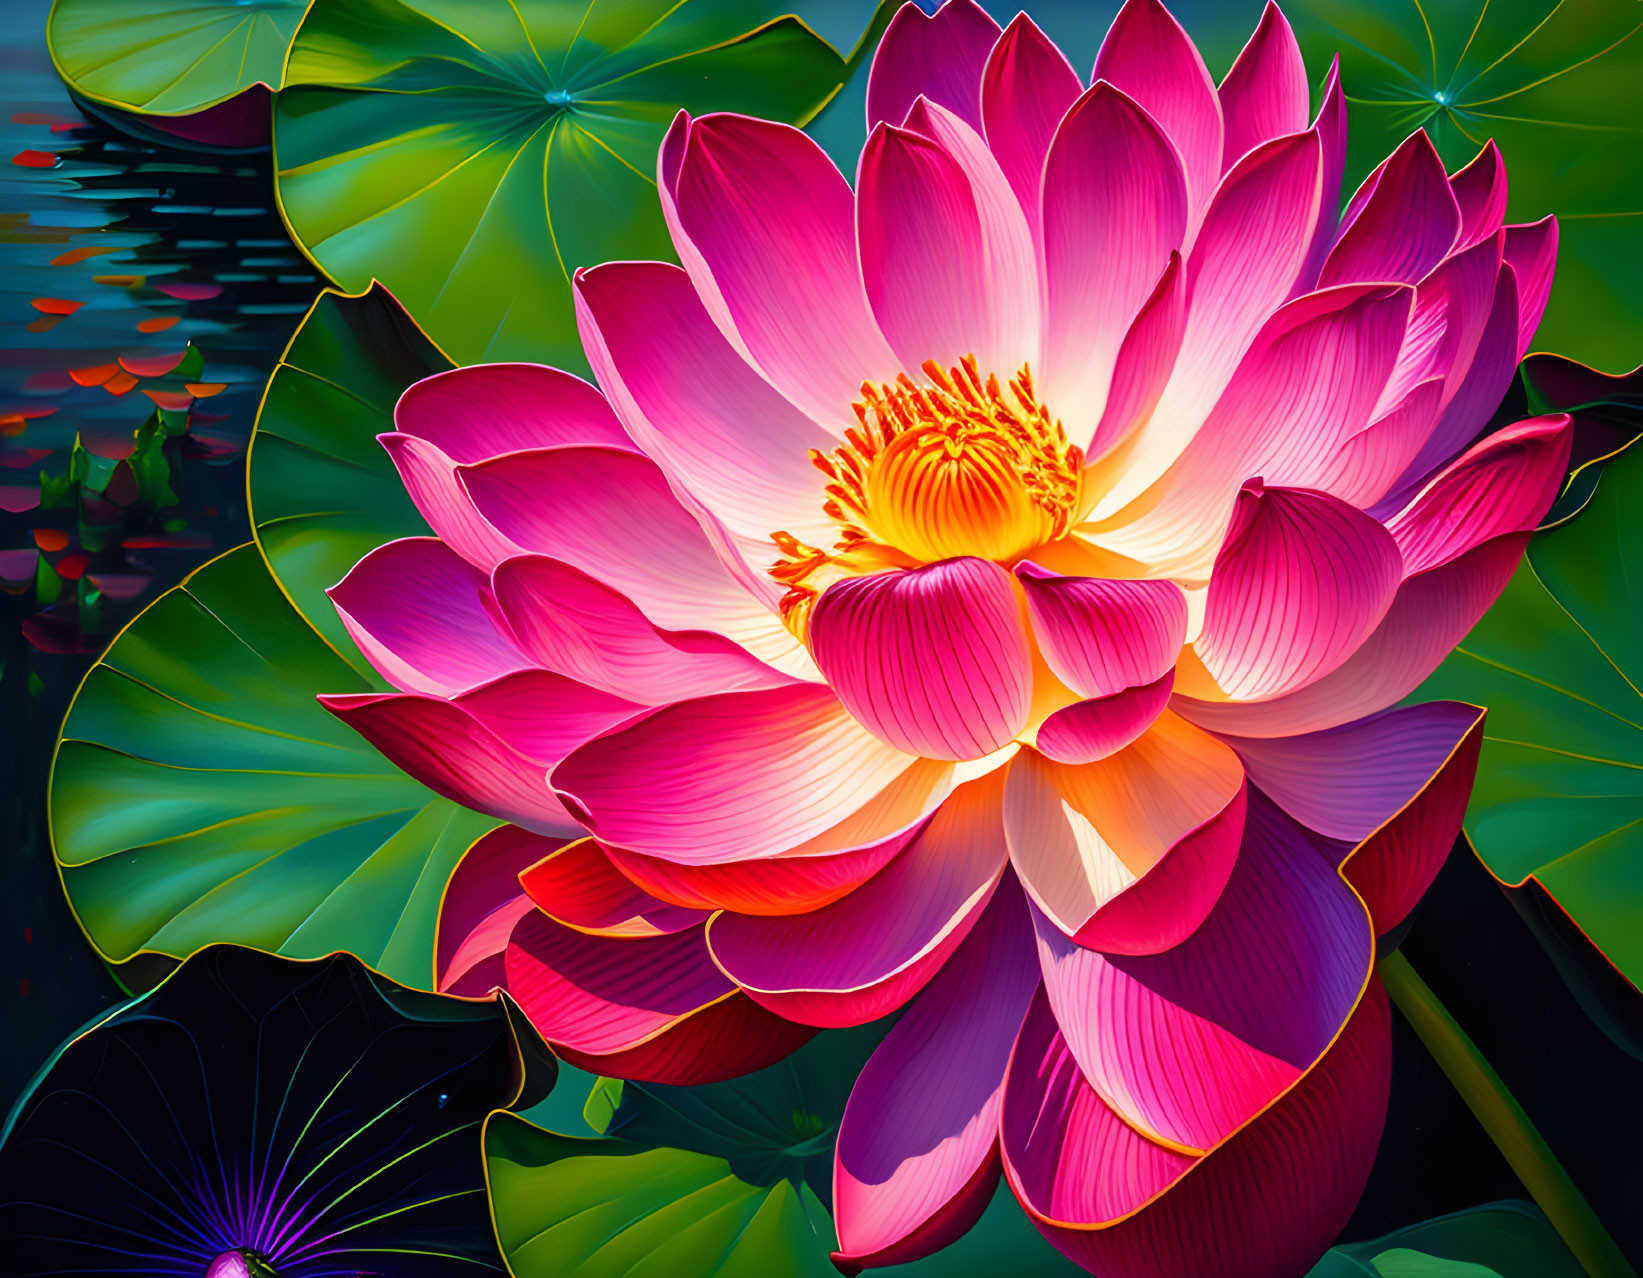 Vibrant digital art: Large pink lotus flower with detailed petals and green lily pads on